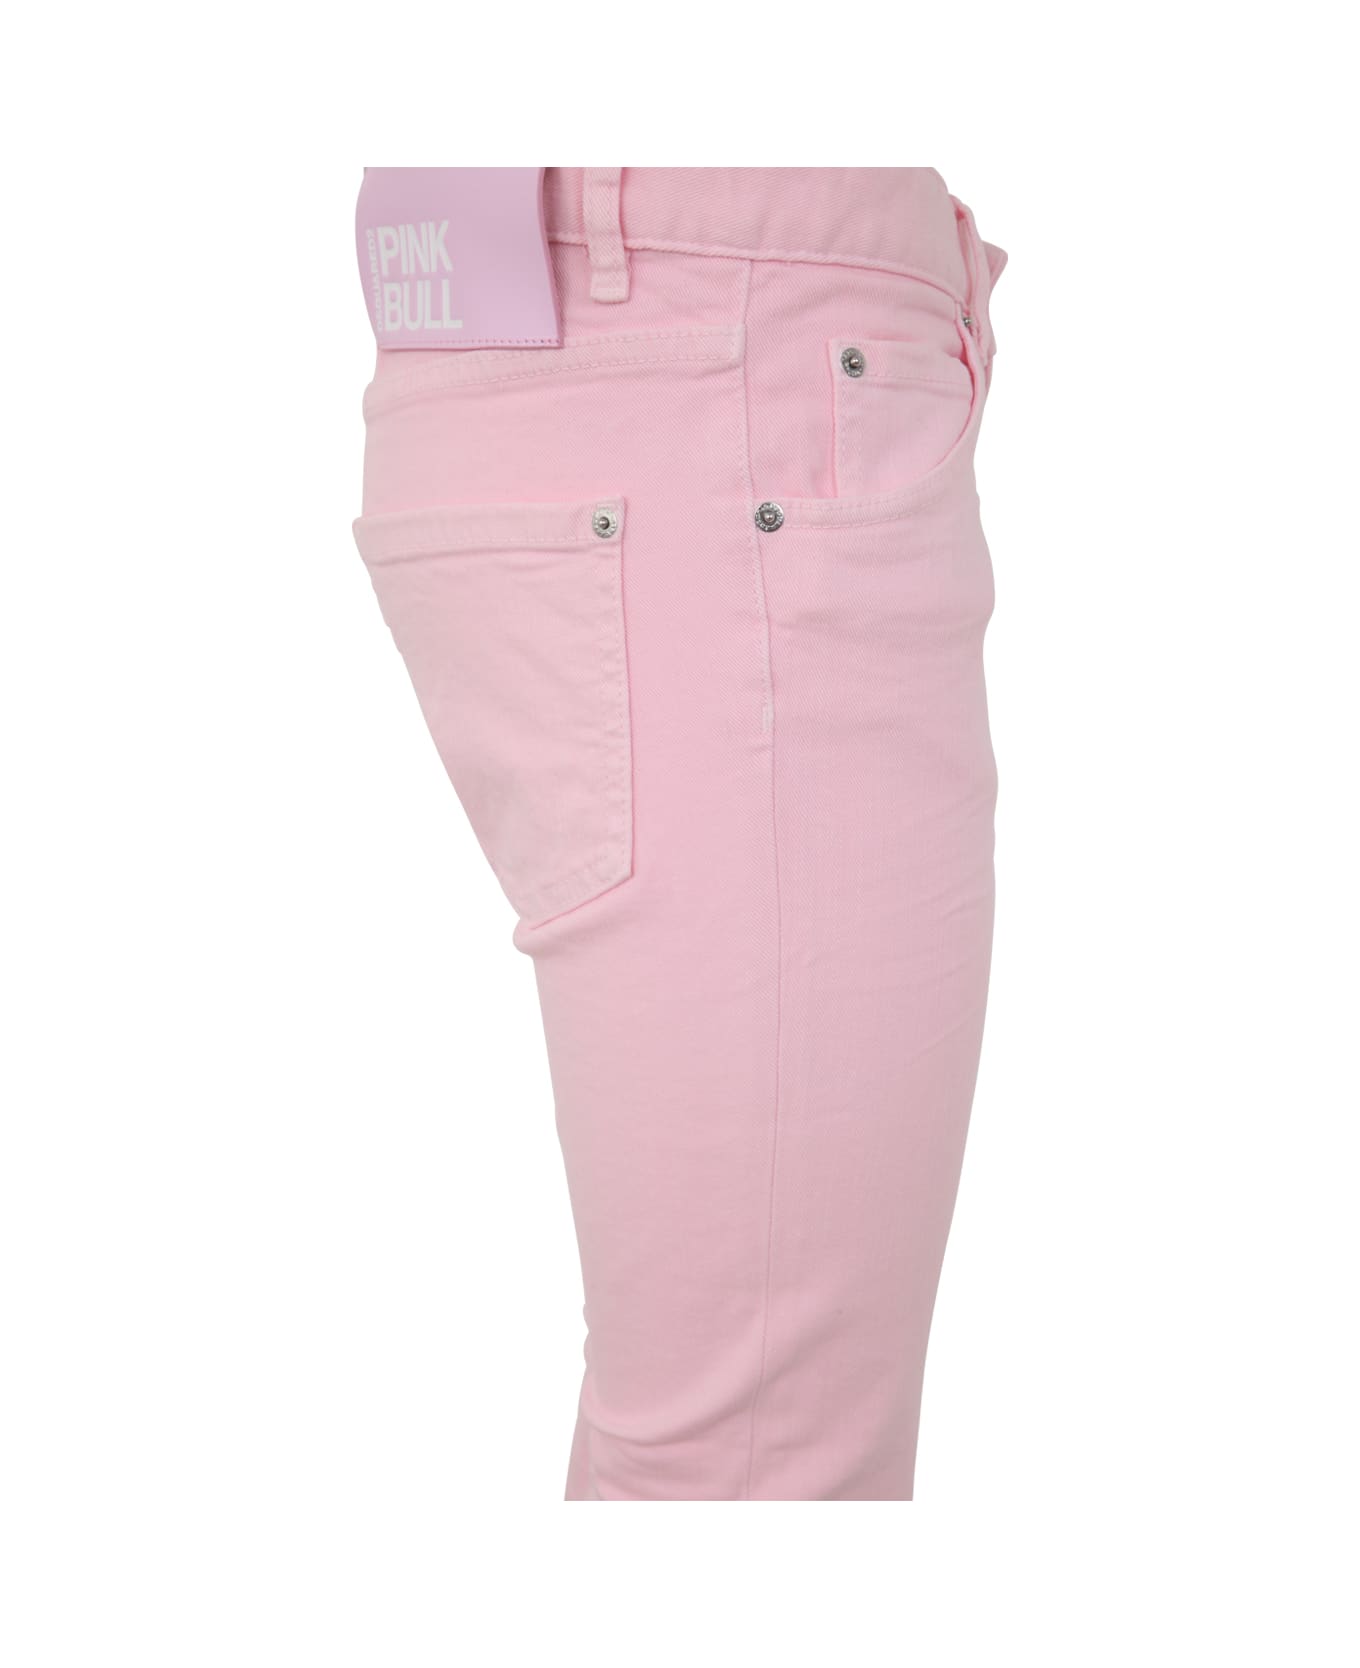 Dsquared2 Cool Girl Jeans - Pink ボトムス